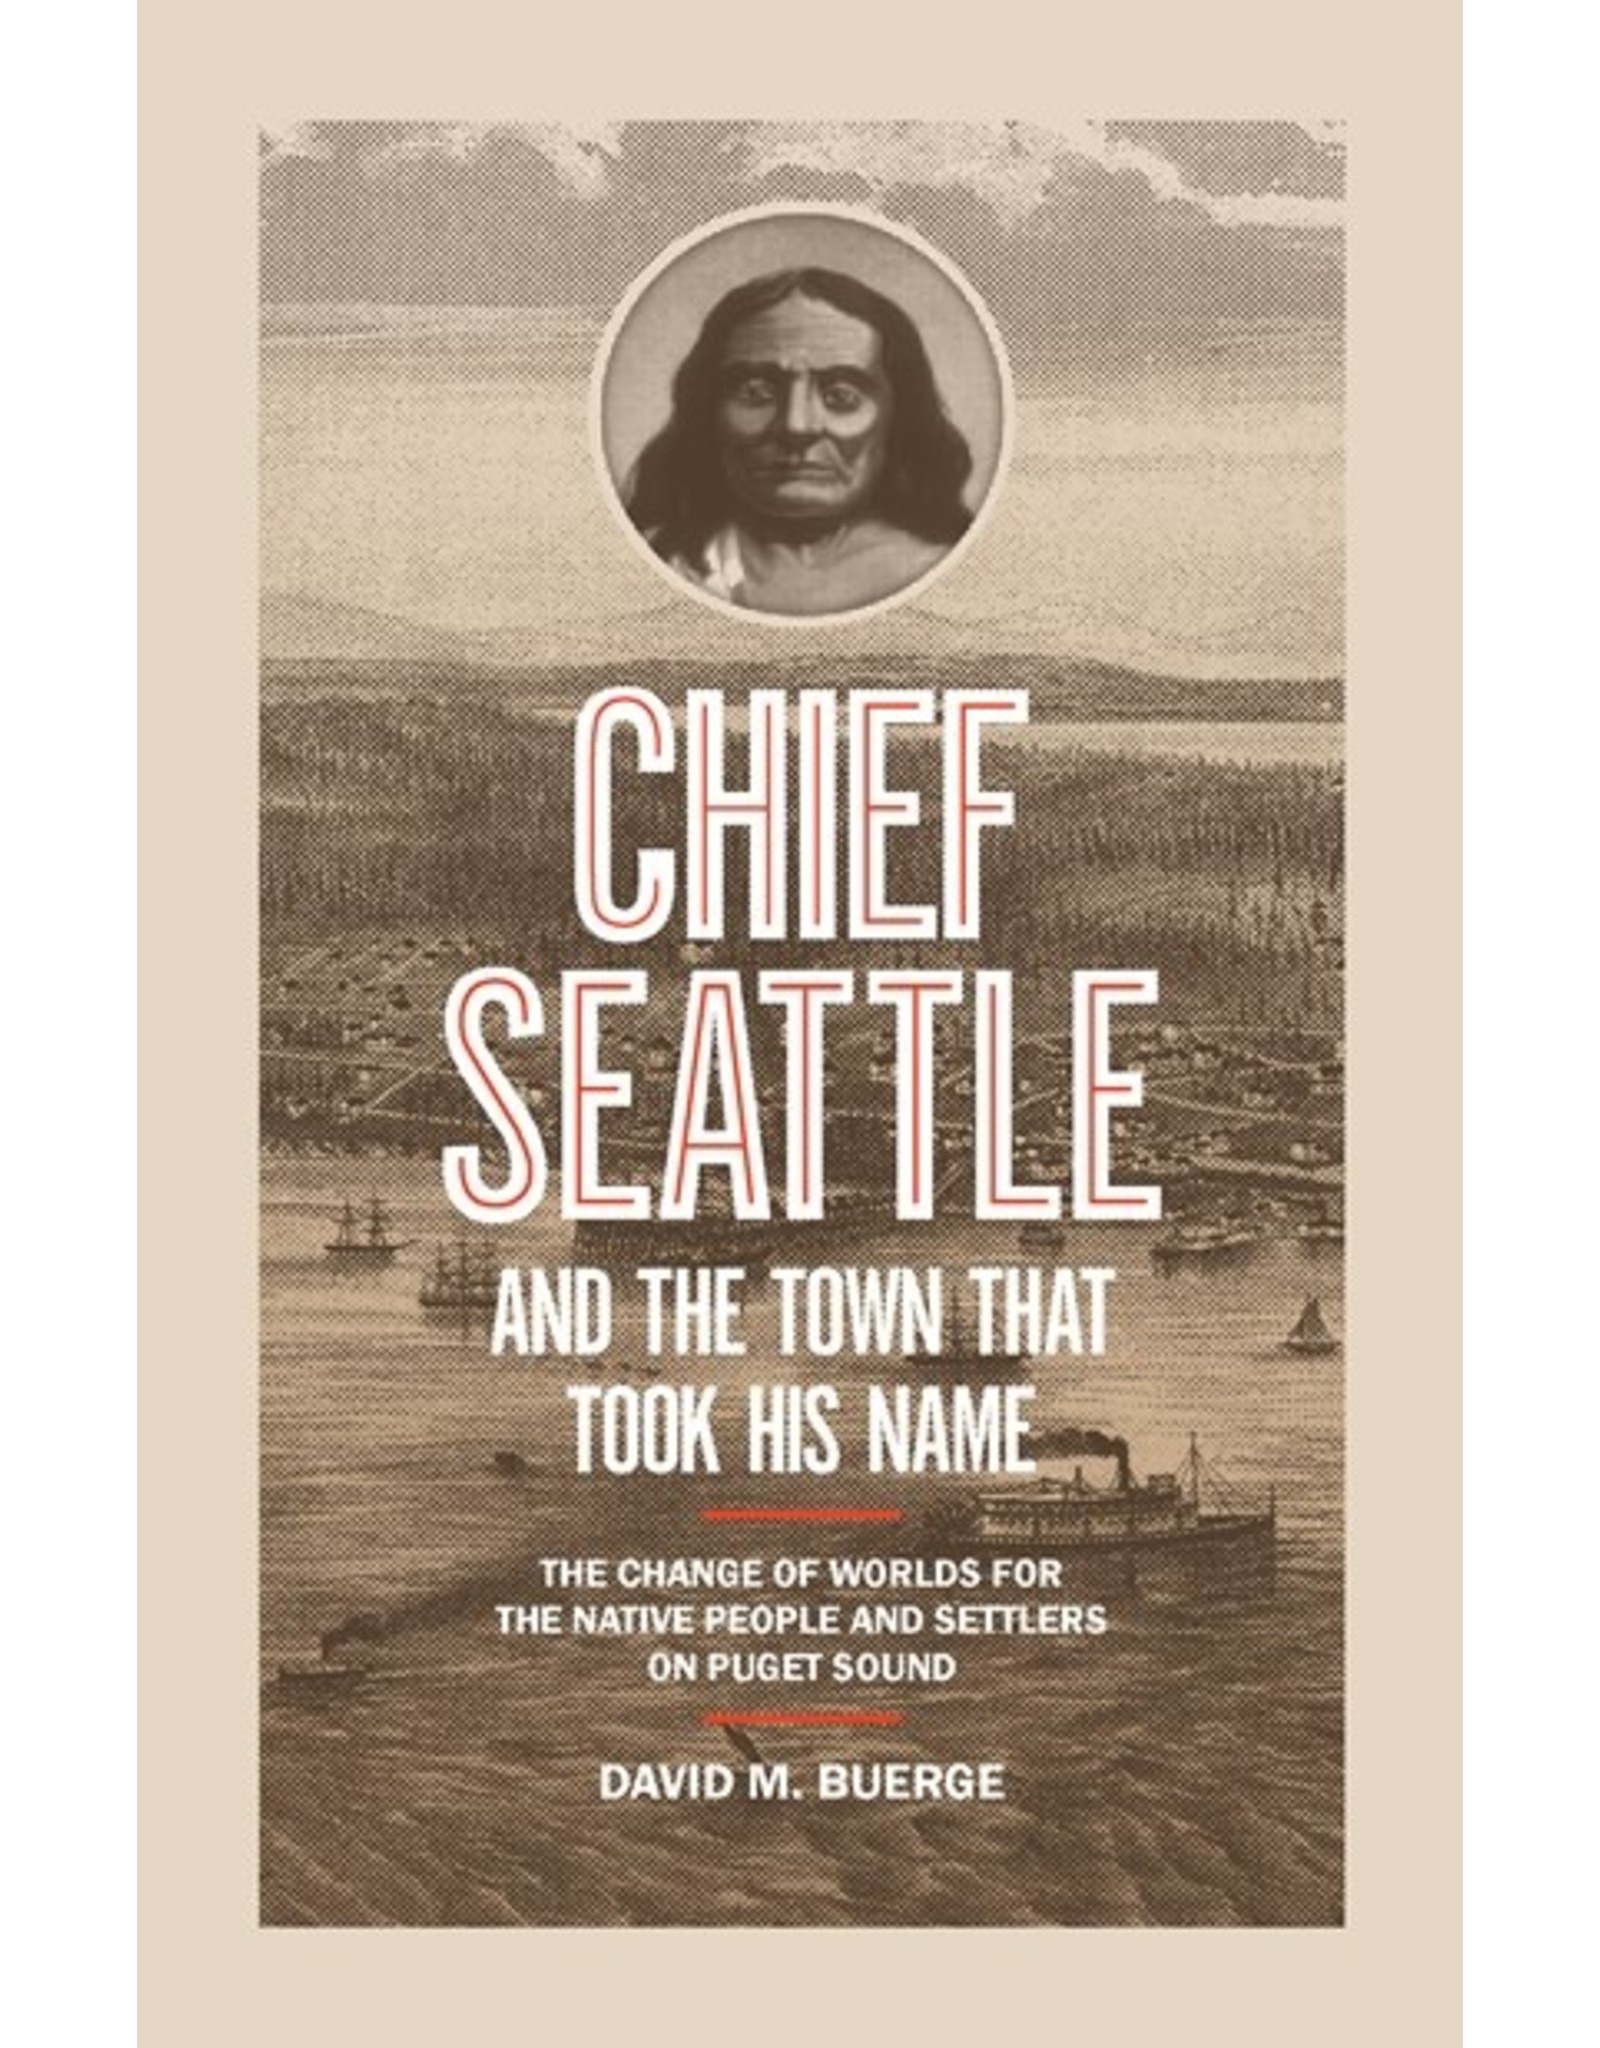 Books Cheif Seattle and the Town that Took His Name by David M. Buerge